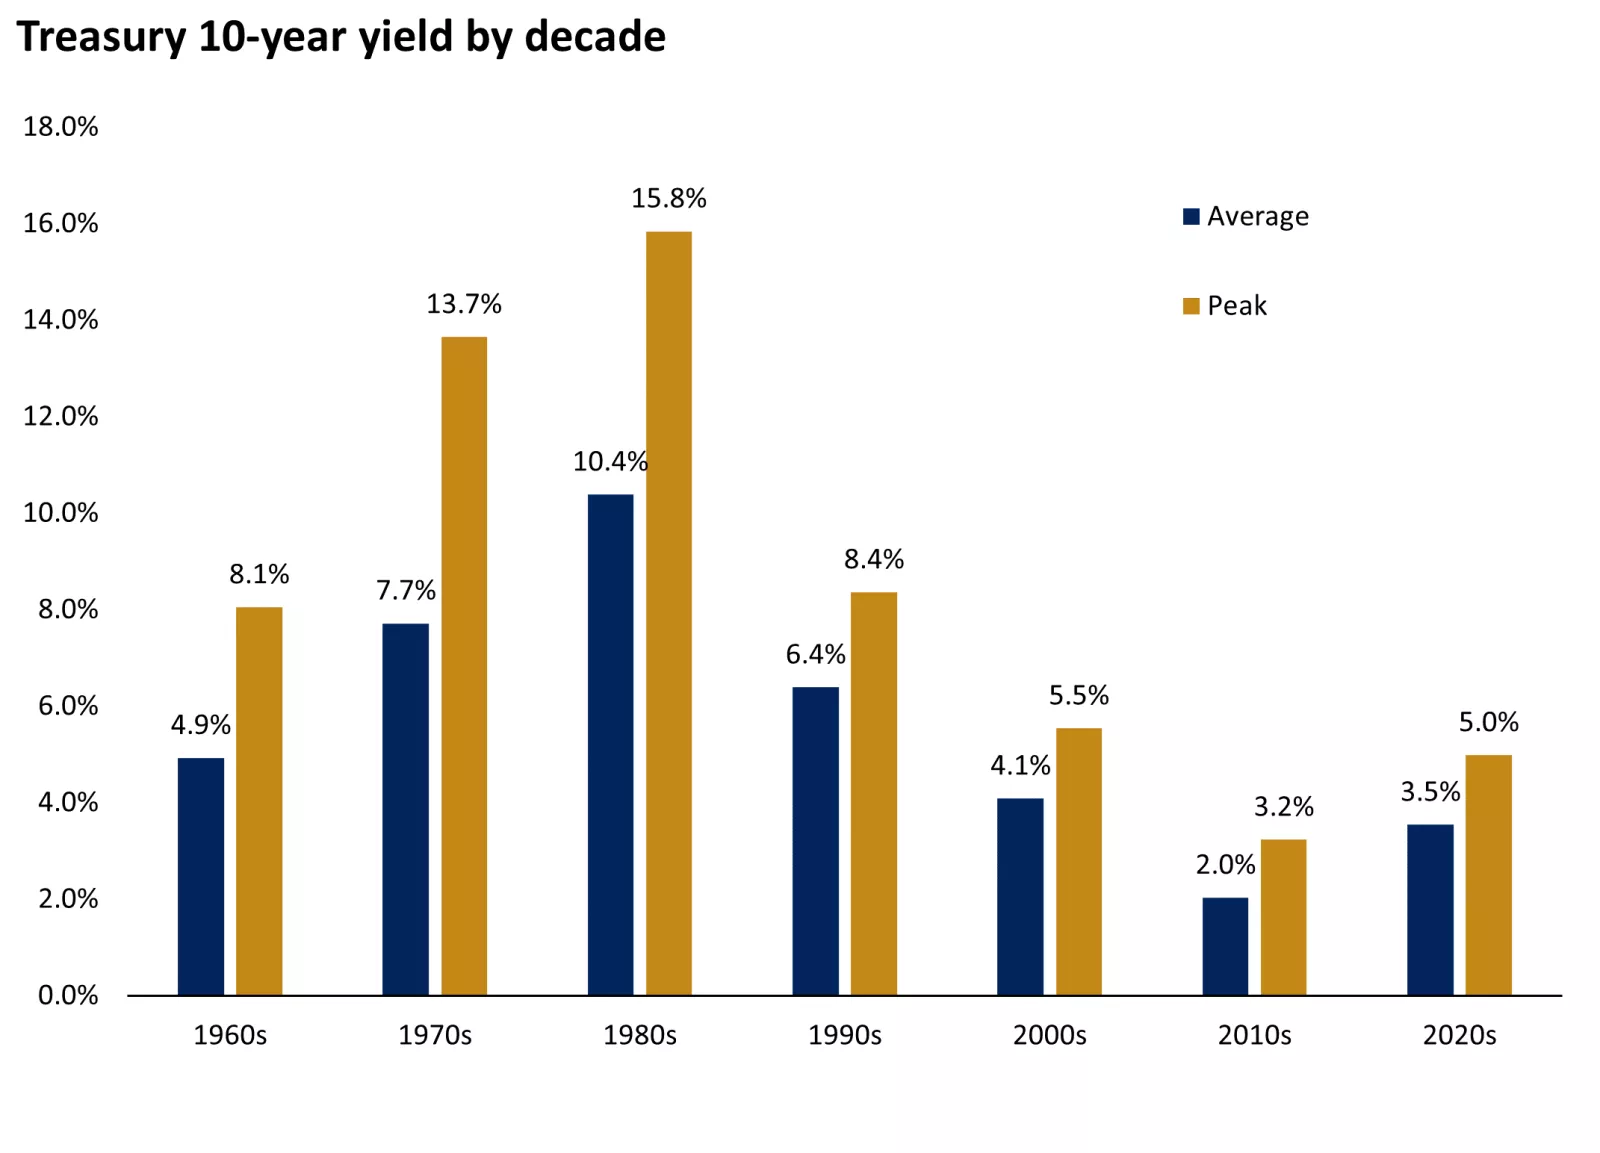 The graph shows the average and peak 10-year government bond yield by decade.